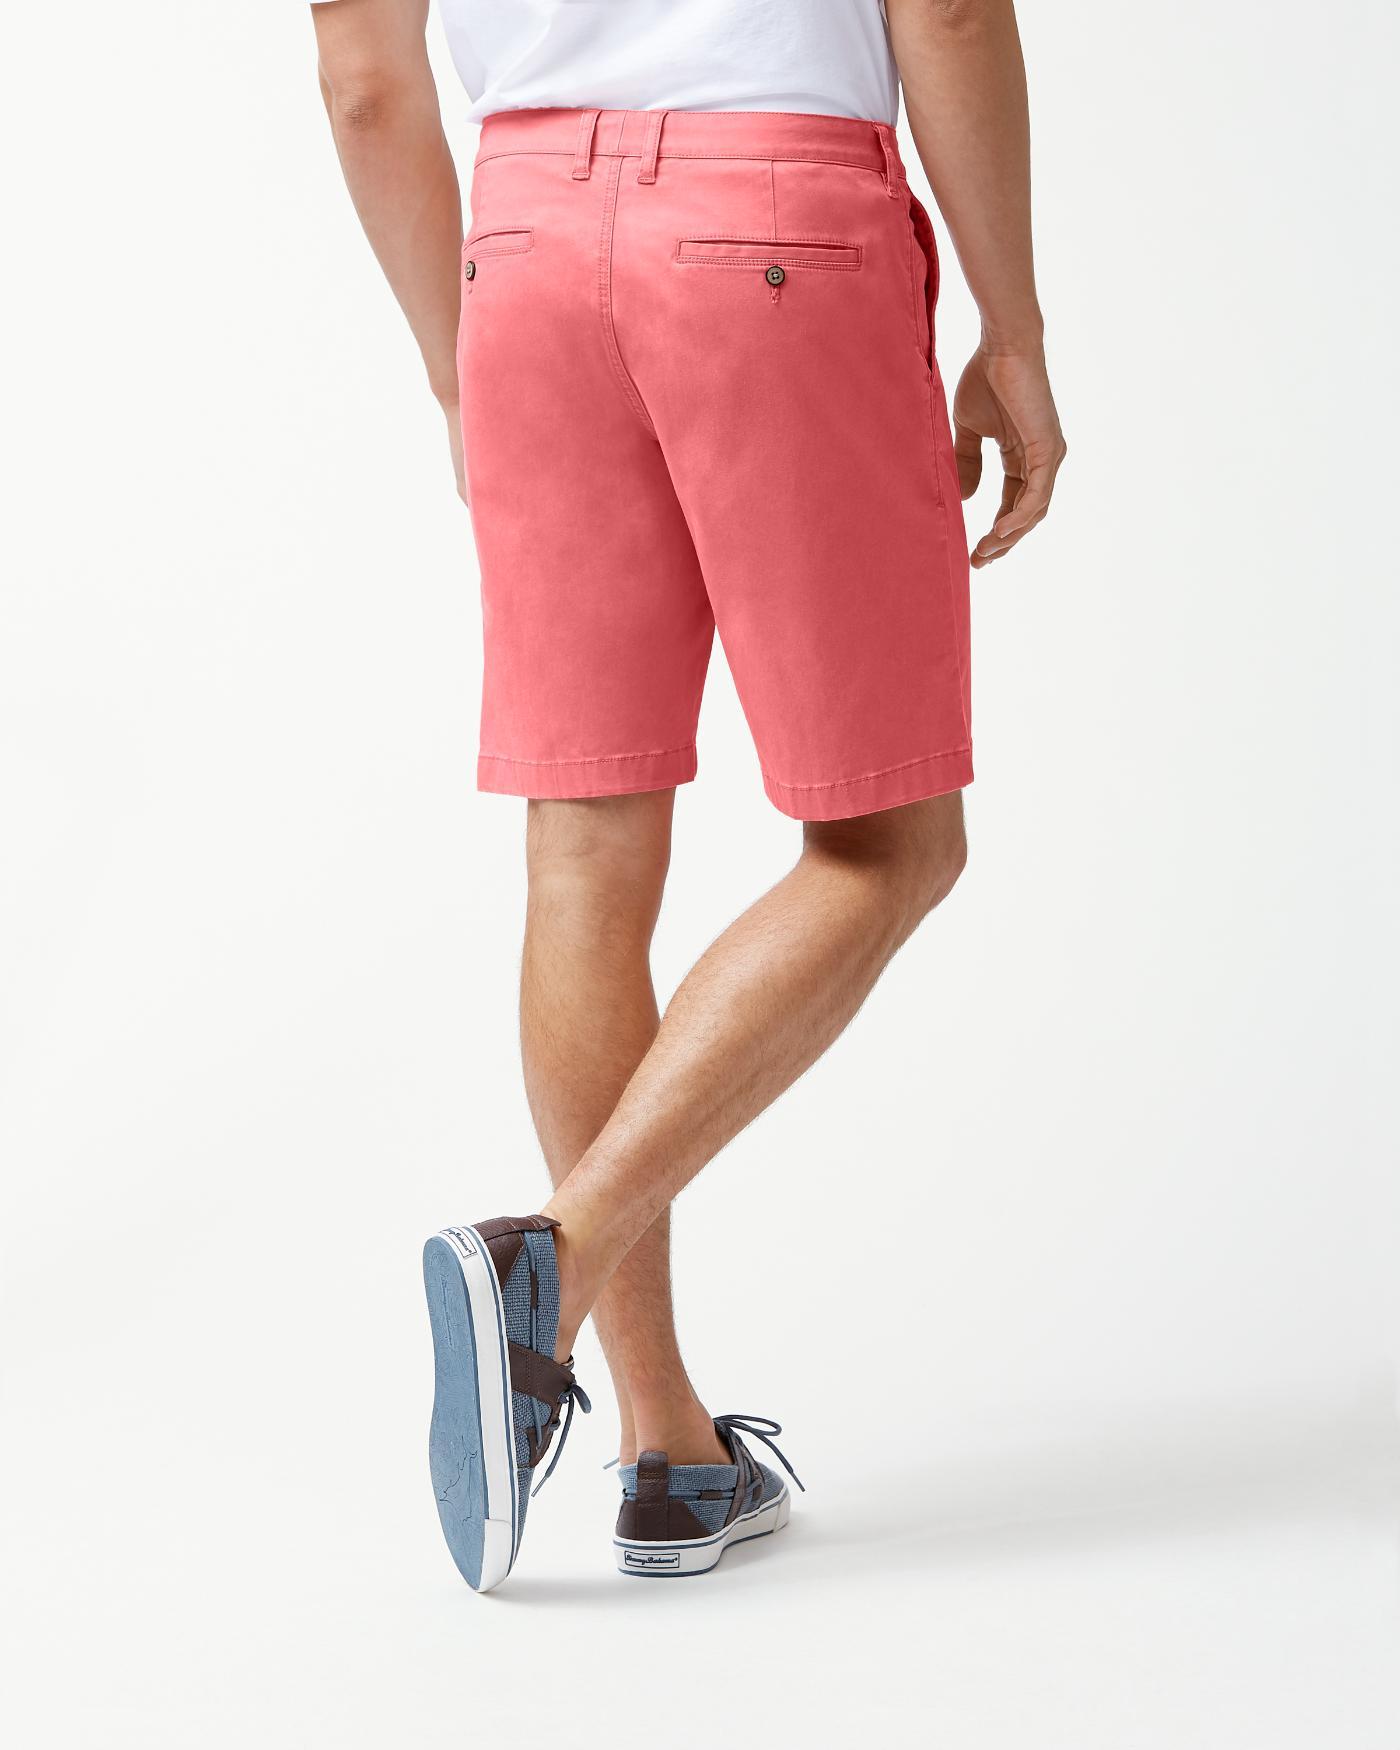 Tommy Bahama Cotton Boracay 10-inch Chino Shorts in Pink for Men - Lyst